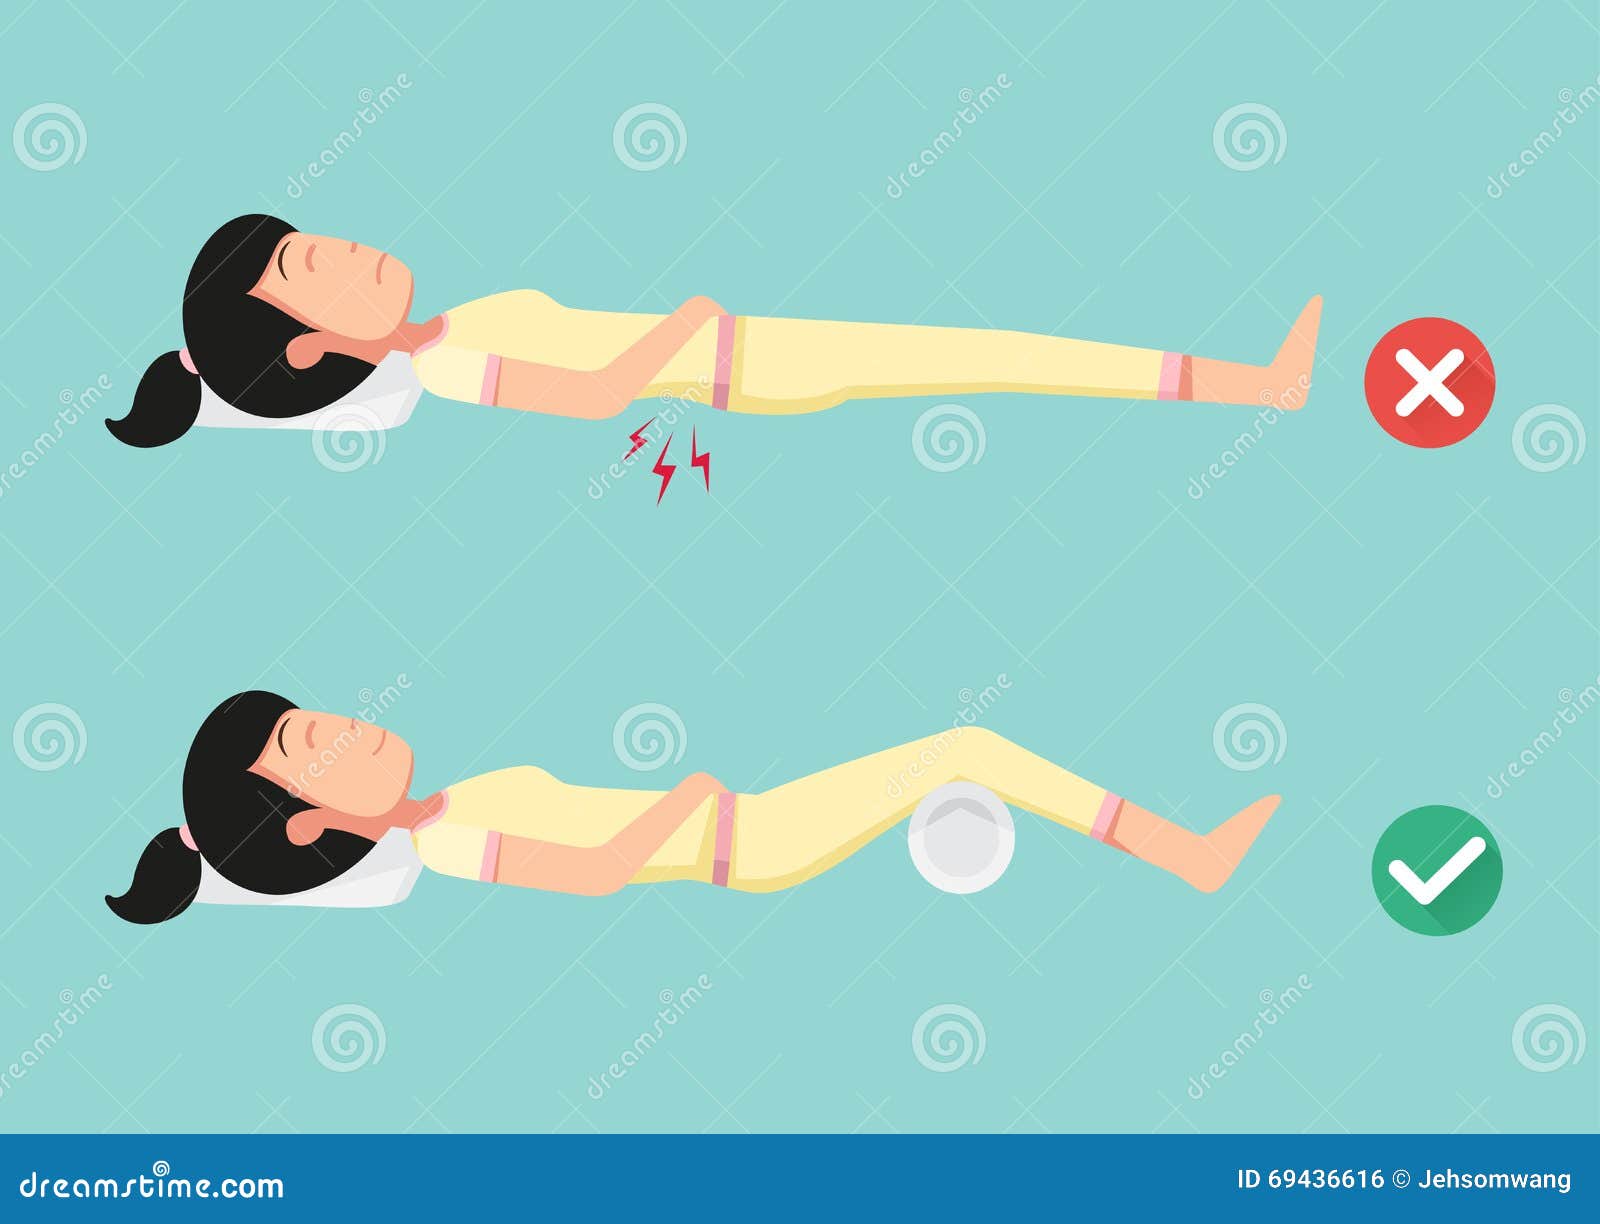 best and worst positions for sleeping, 